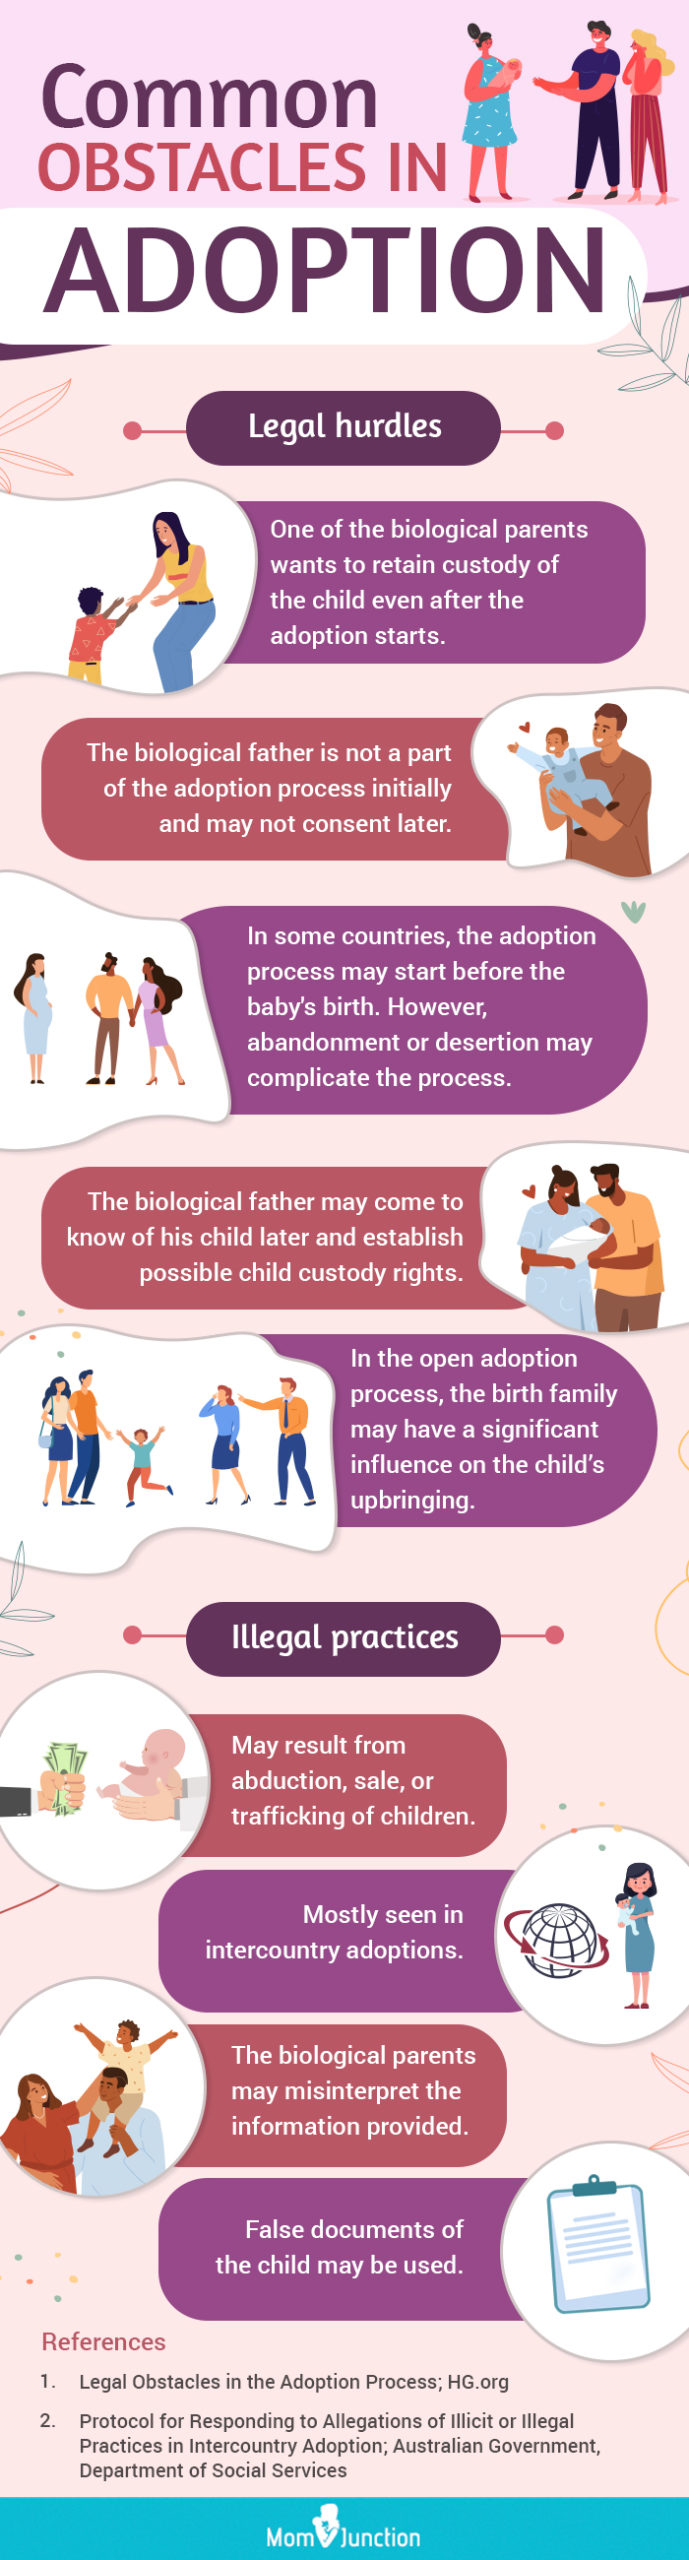 common obstacles in adoption [infographic]